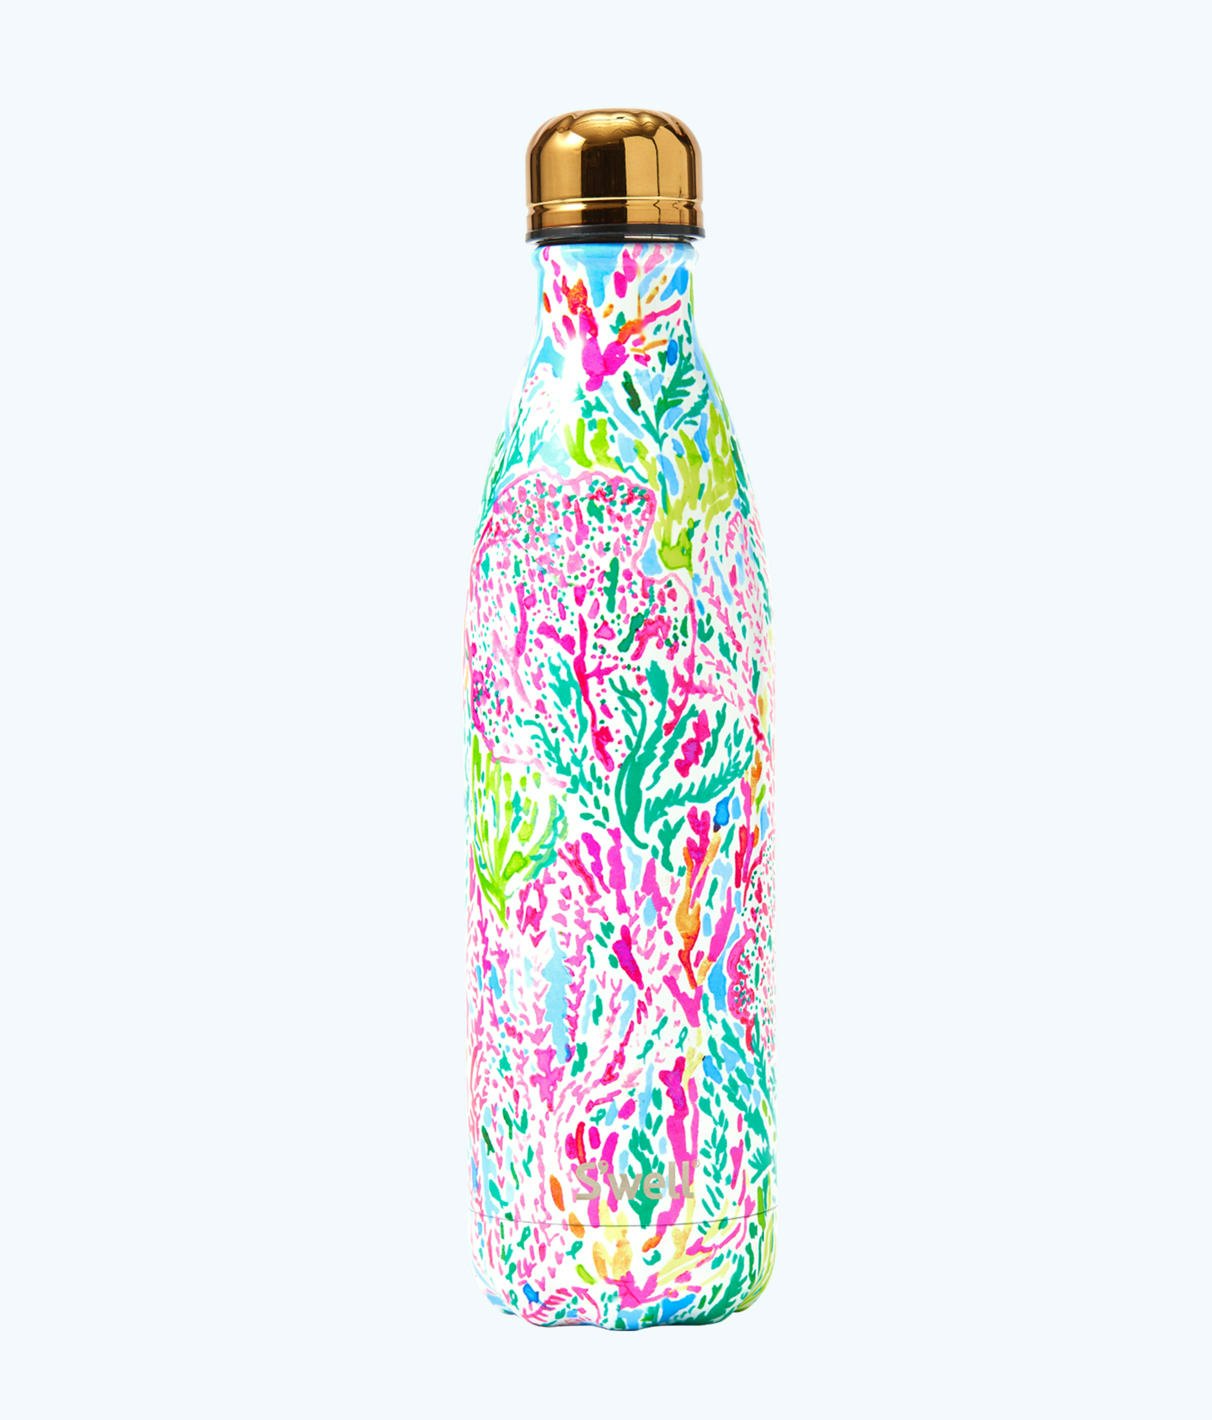 NEW Lilly Pulitzer Swell Bottle Royal Purple Swell 60 Animals 17 Ounce 